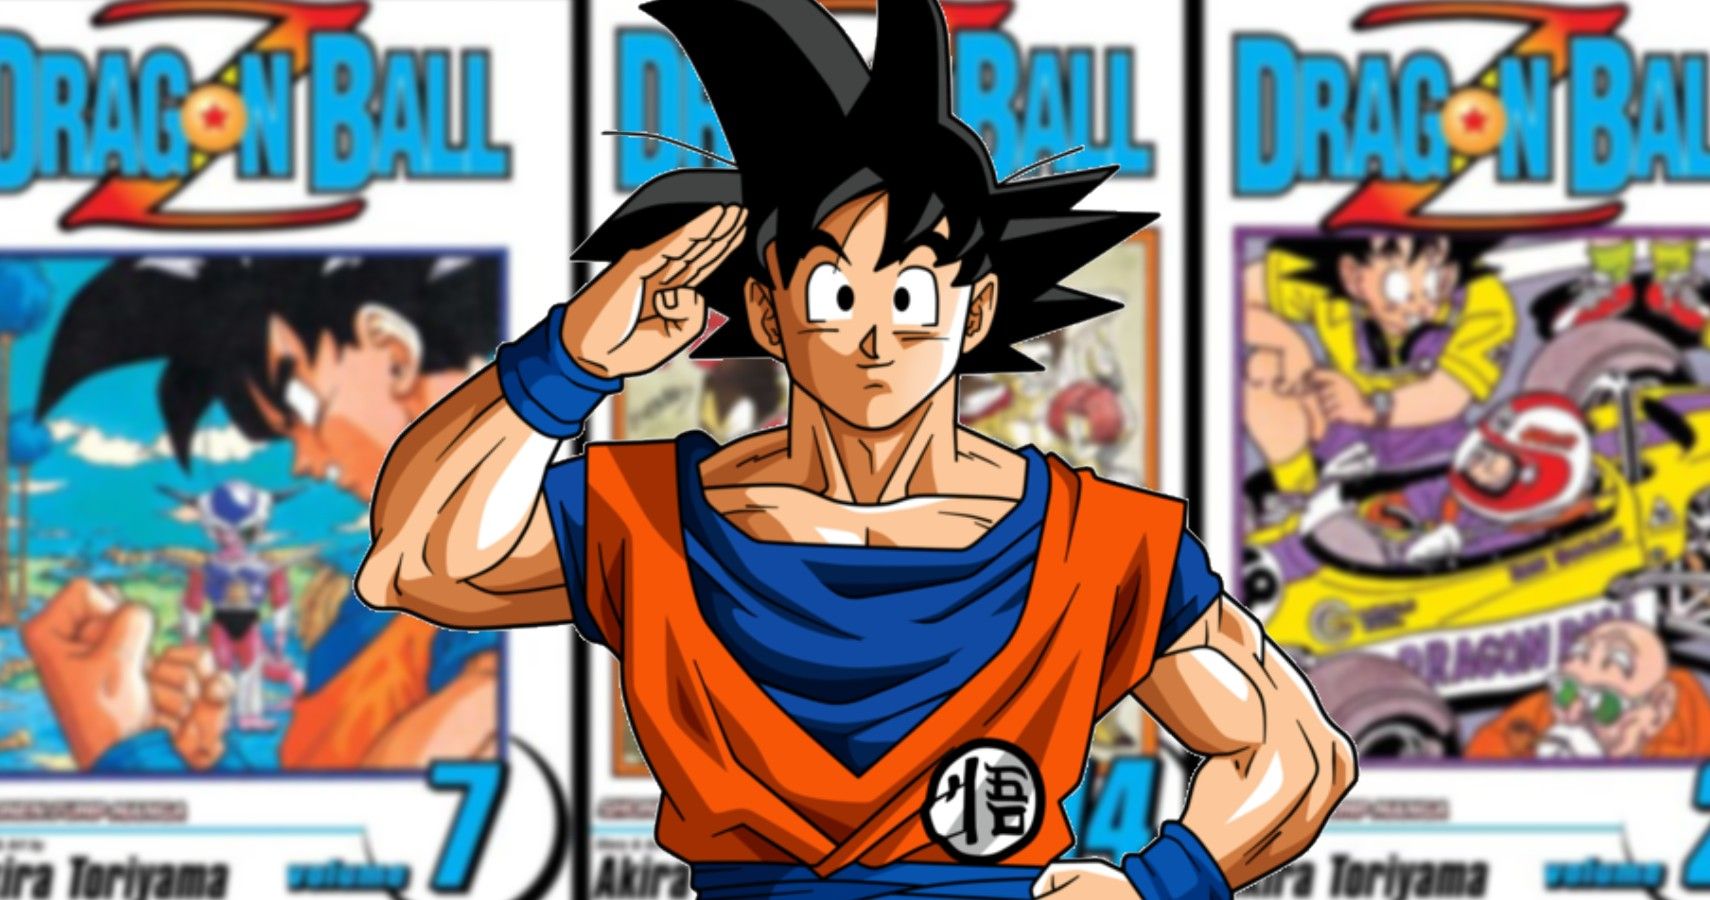 The 10 Best Manga Volumes Of Dragon Ball Z (According To Goodreads)